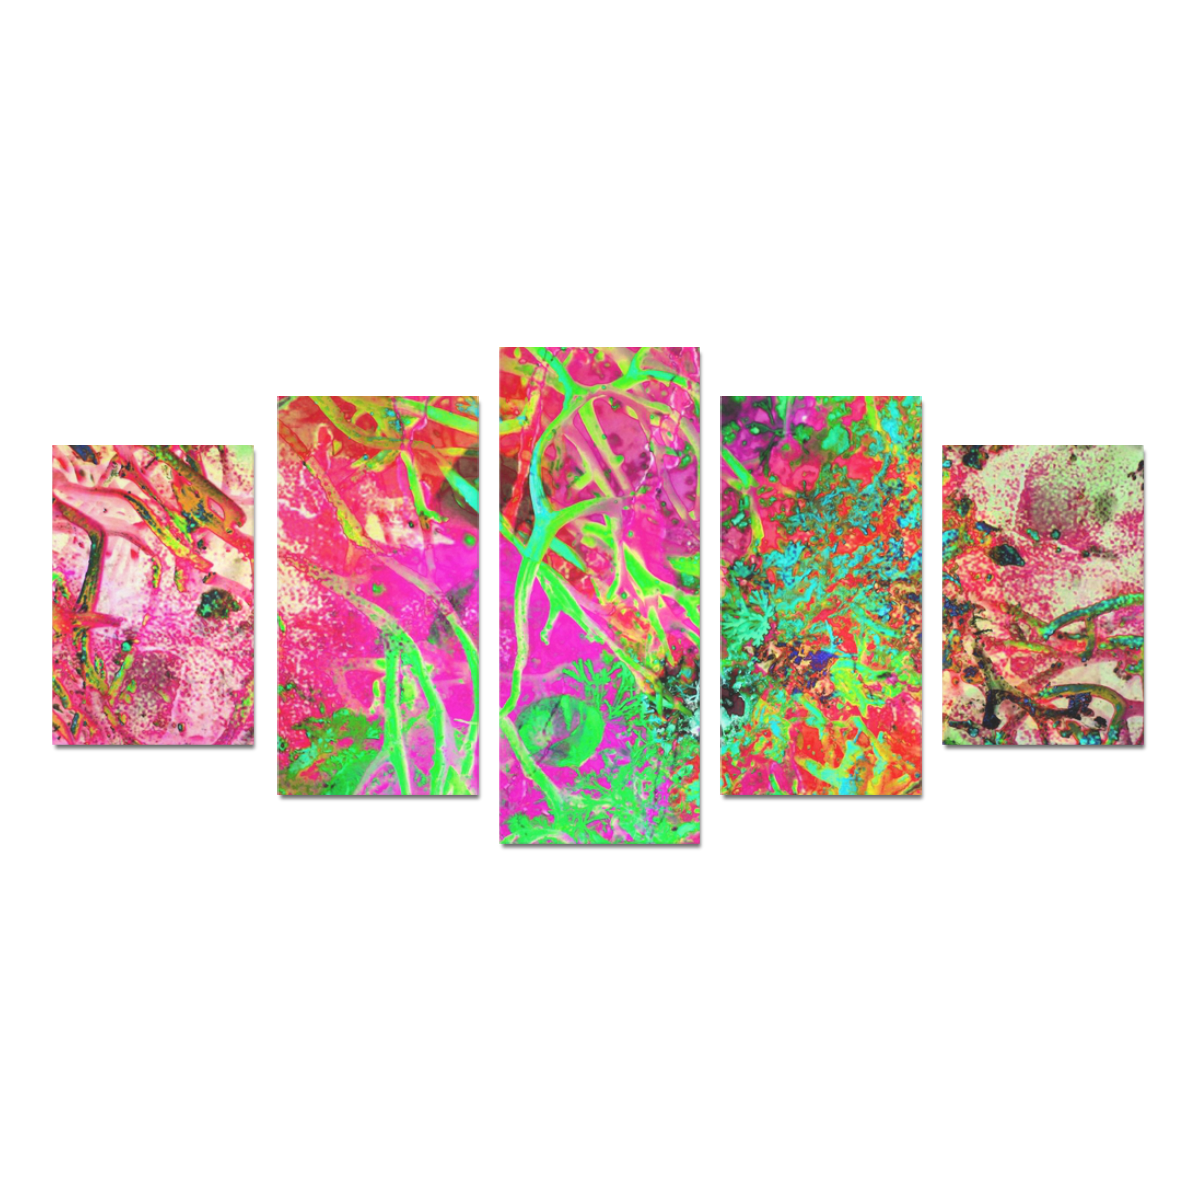 Sea weed in Neon Canvas set by Martina Webster Canvas Print Sets D (No Frame)